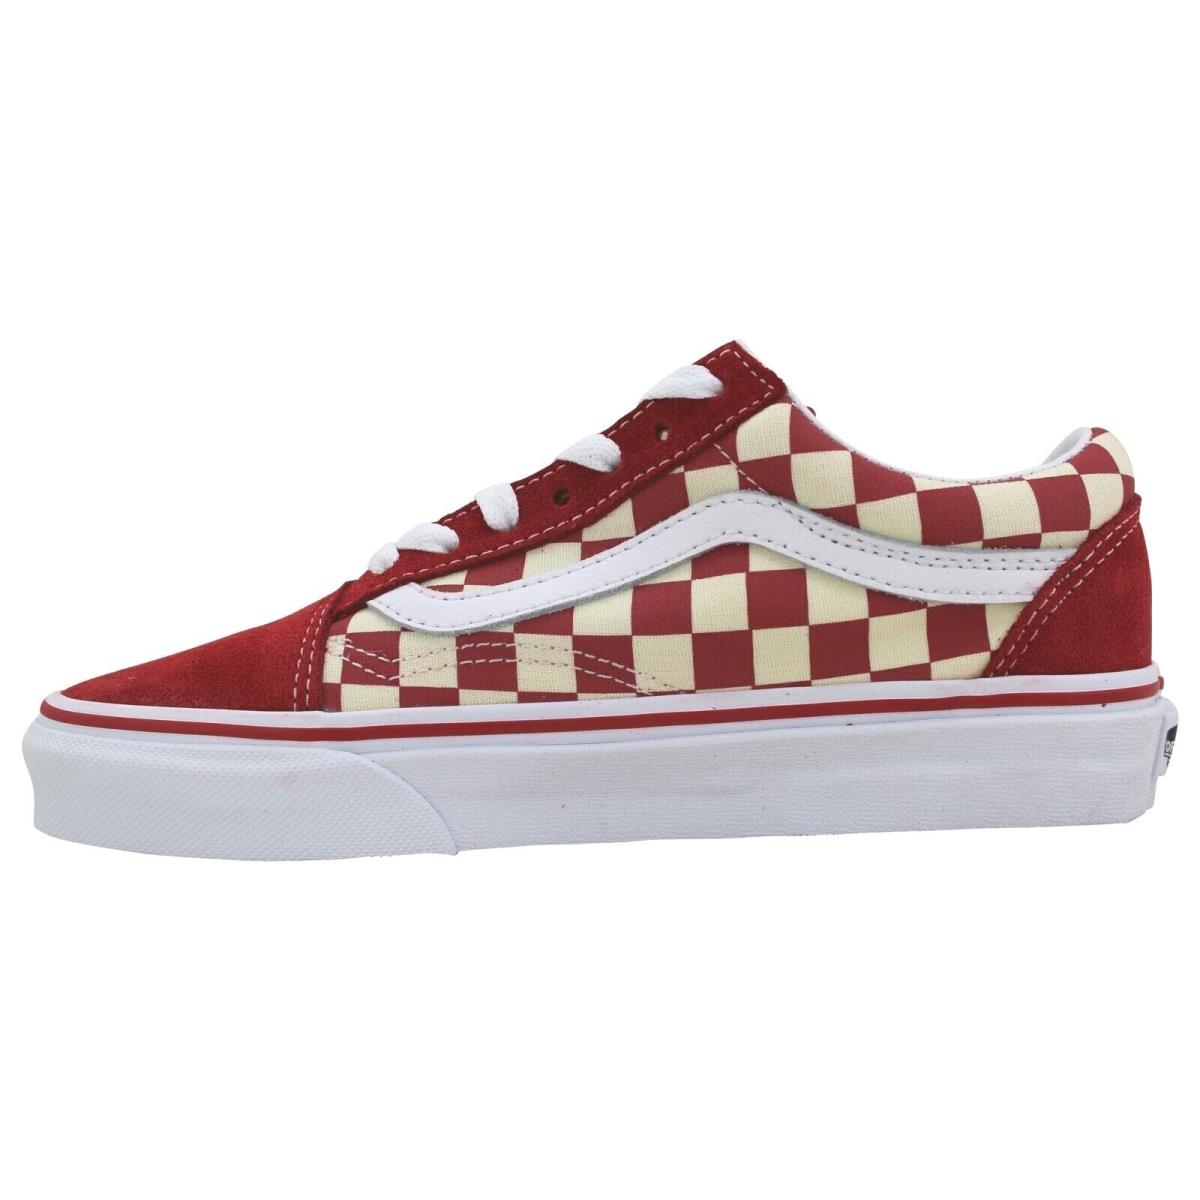 Vans Old Skool Primary Check Red/white VN0A38G1P0T Men`s Size 7.0 Women`s 8.5